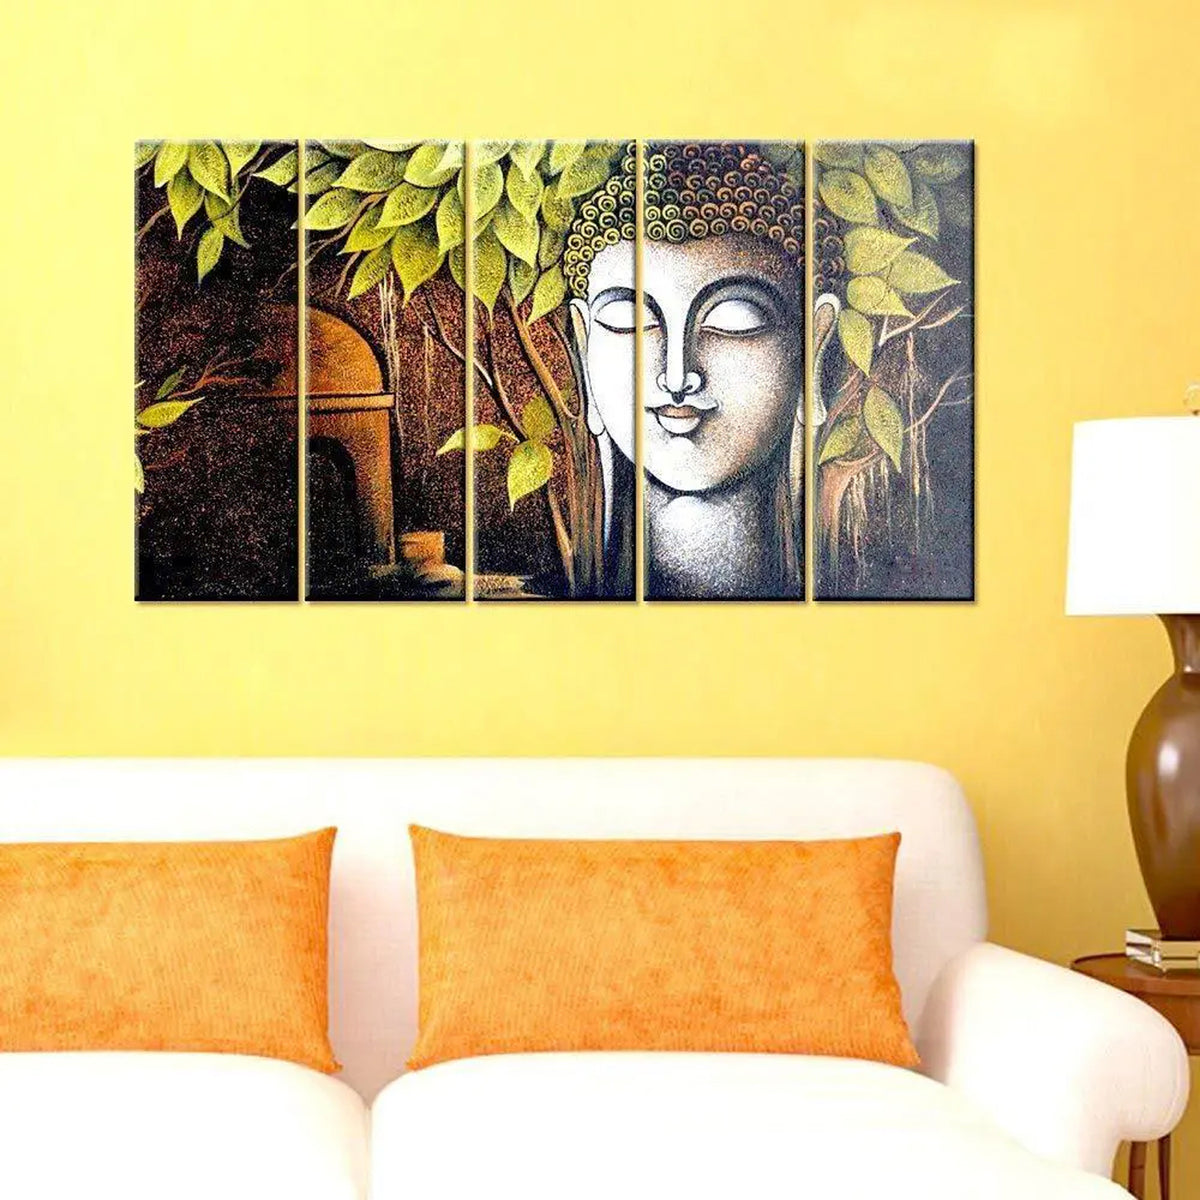 Peaceful Enlightenment with eye-soothing wall painting | budhha wall painting